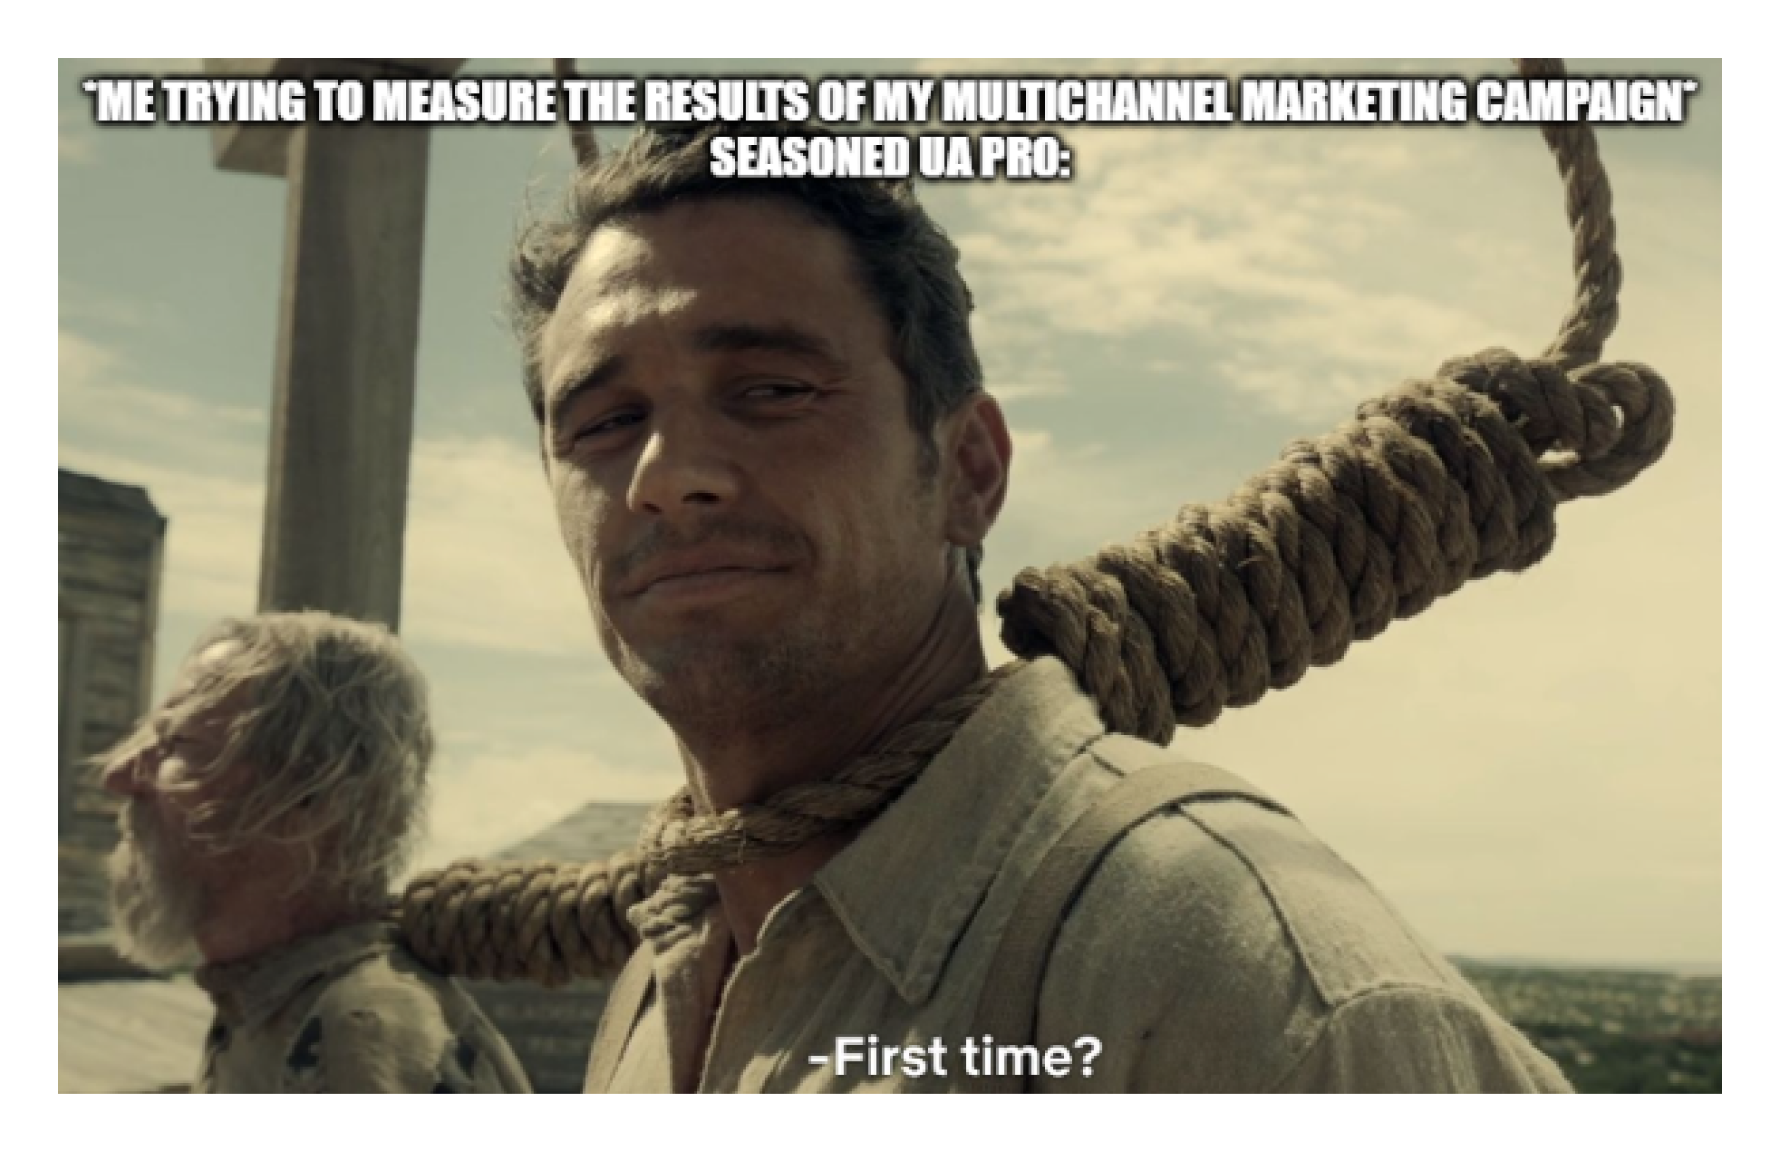 45 Hilarious Mobile Marketing Memes You Can't Resist Sharing